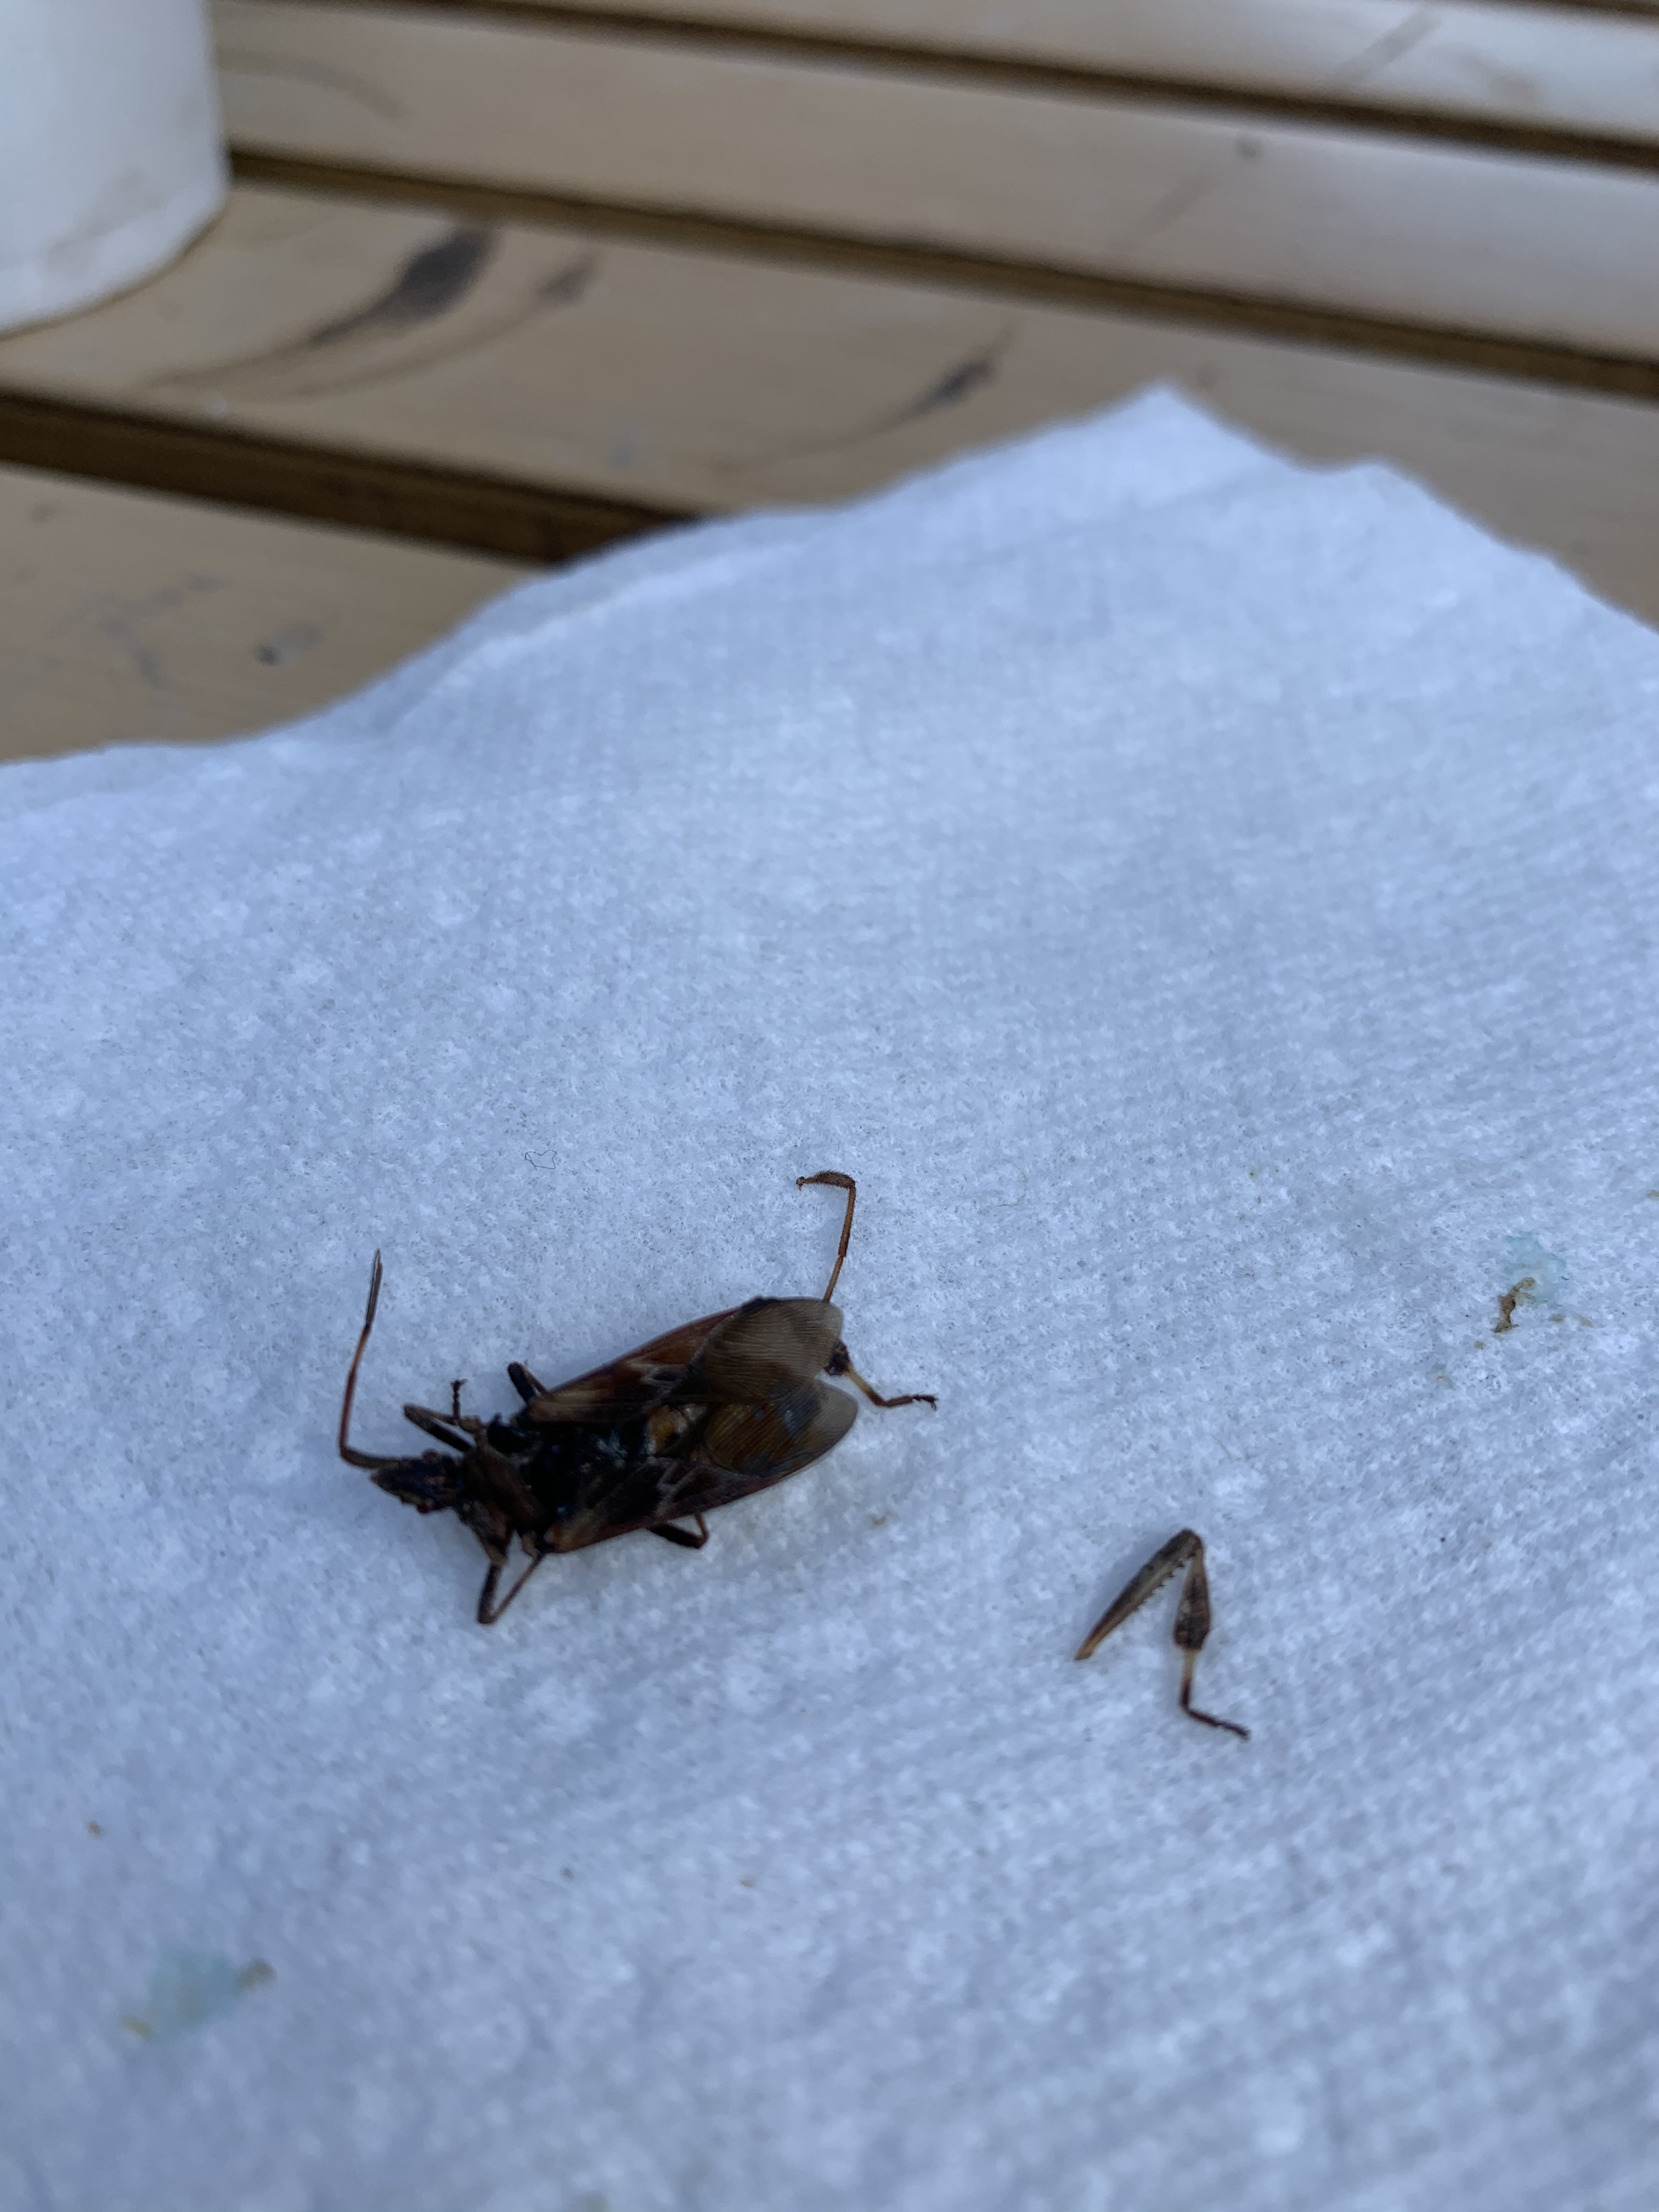 Is this a kissing bug? - Ask Extension